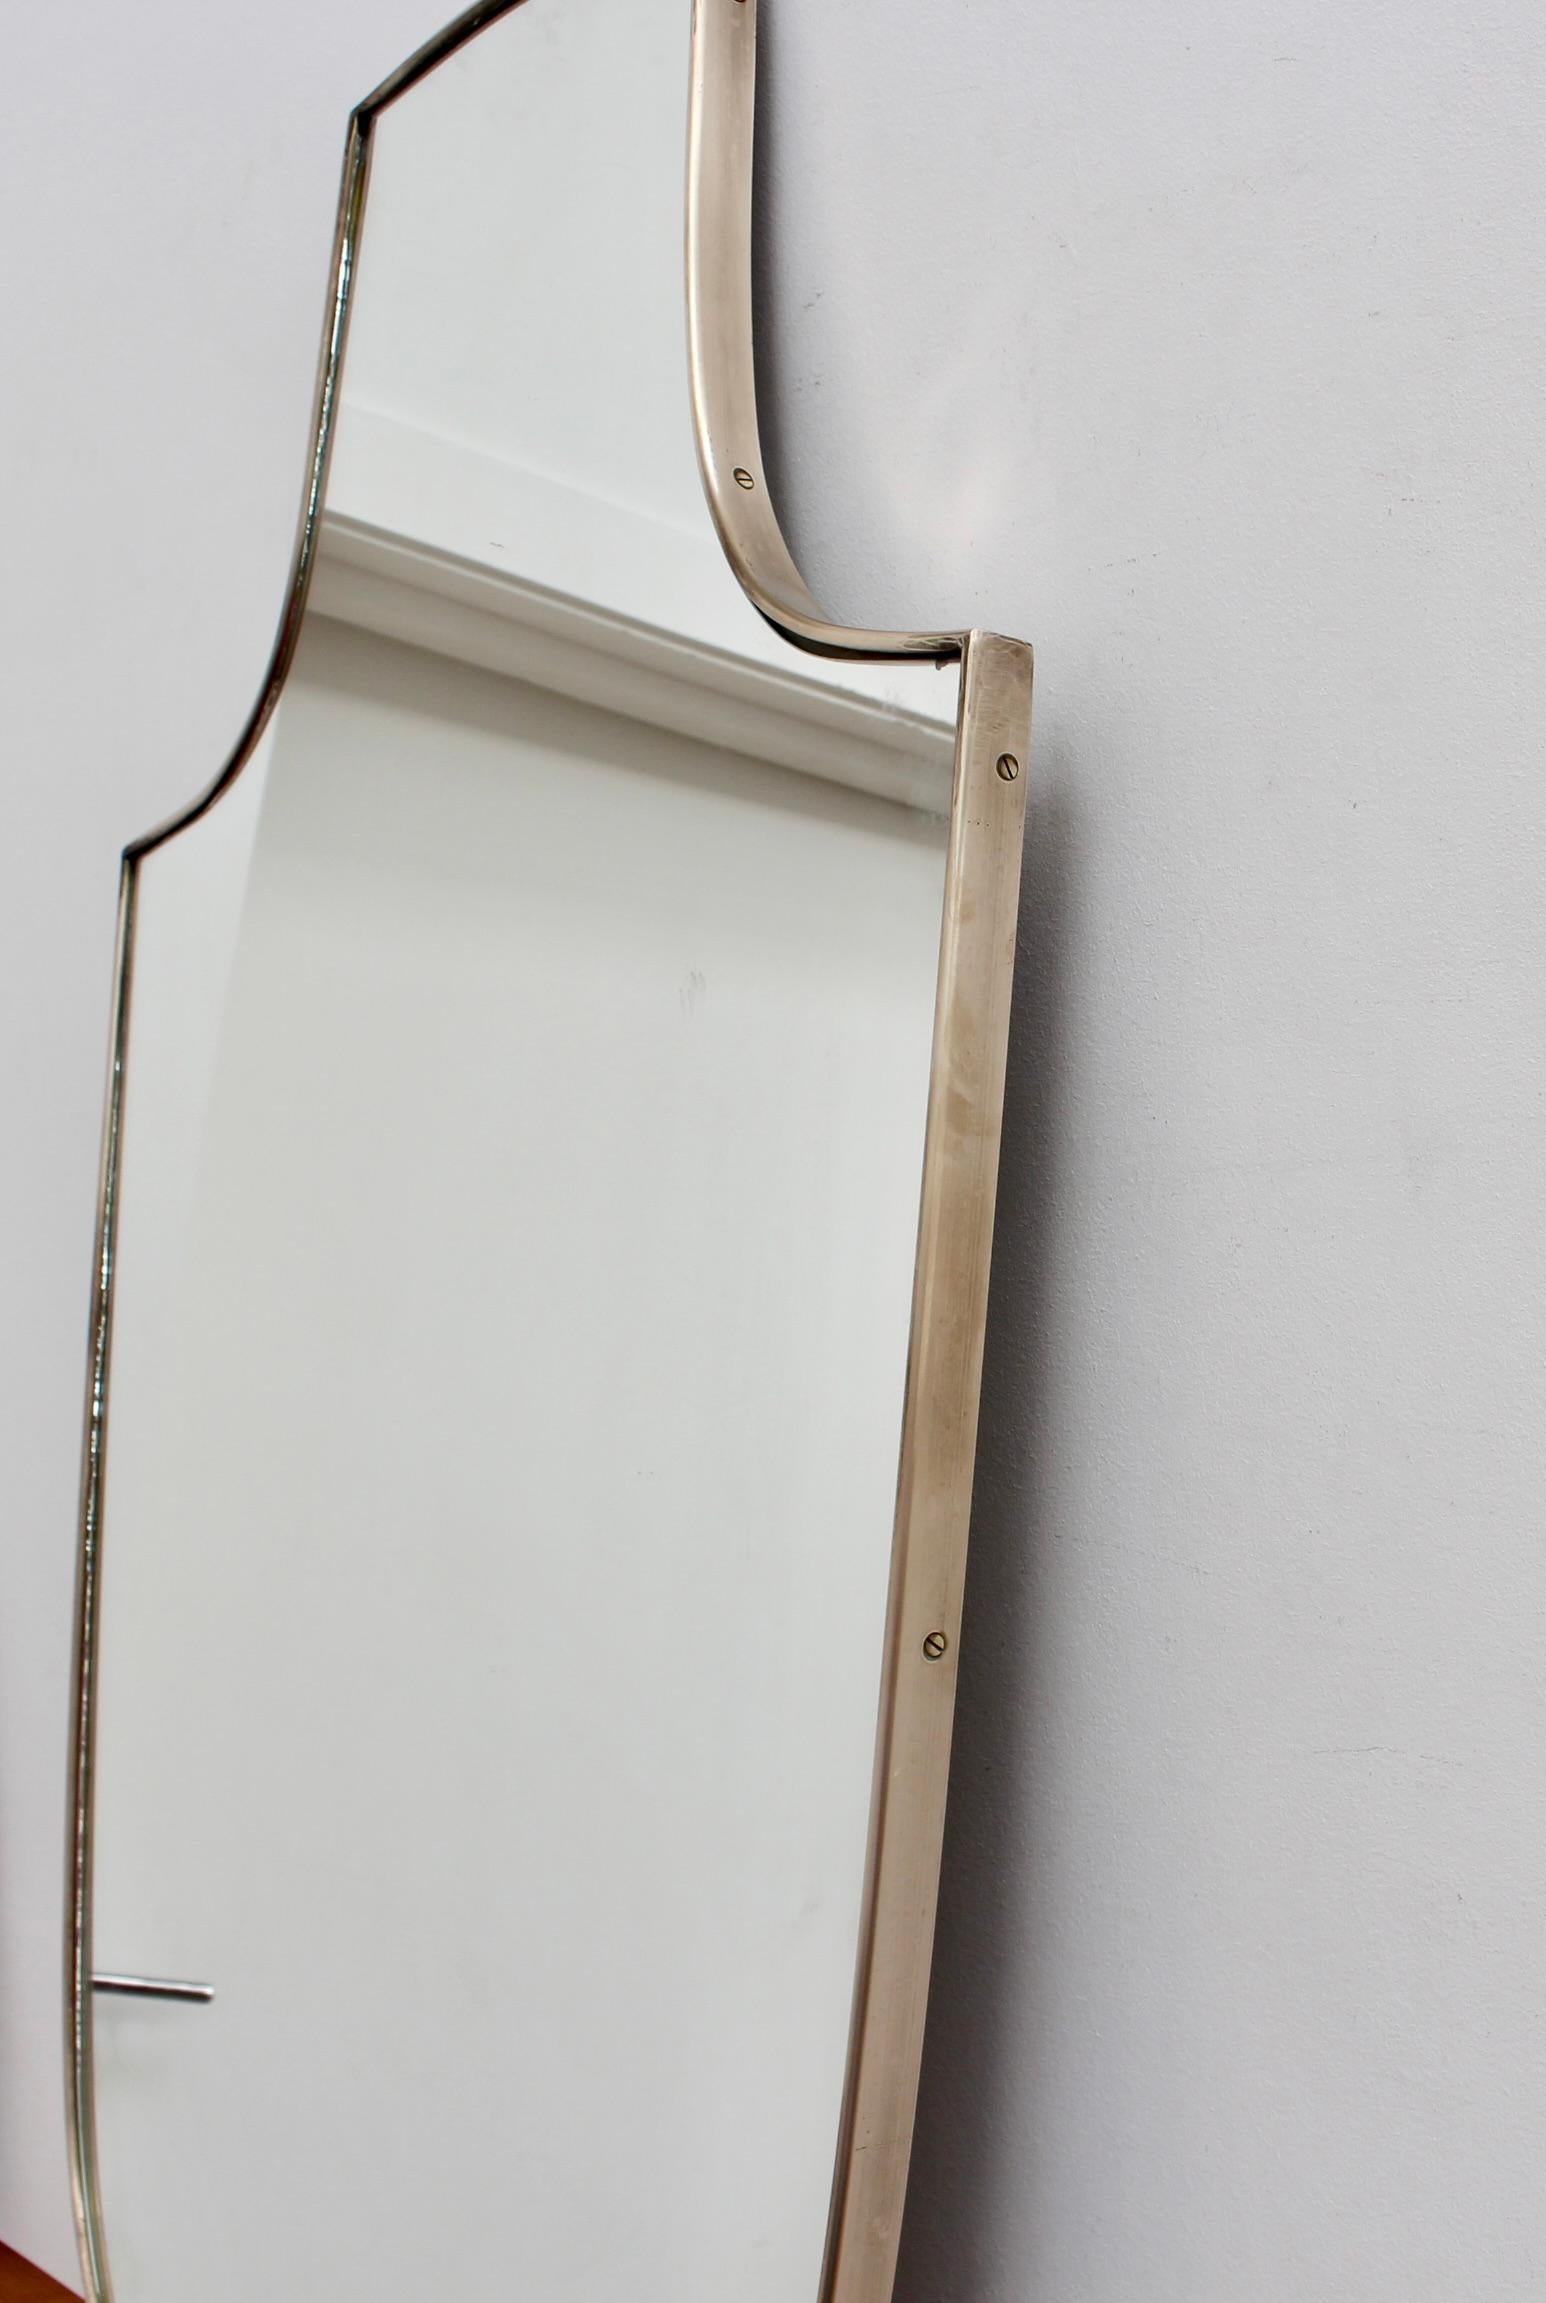 Vintage Italian Wall Mirror with Brass Frame, 'circa 1950s', Large For Sale 3